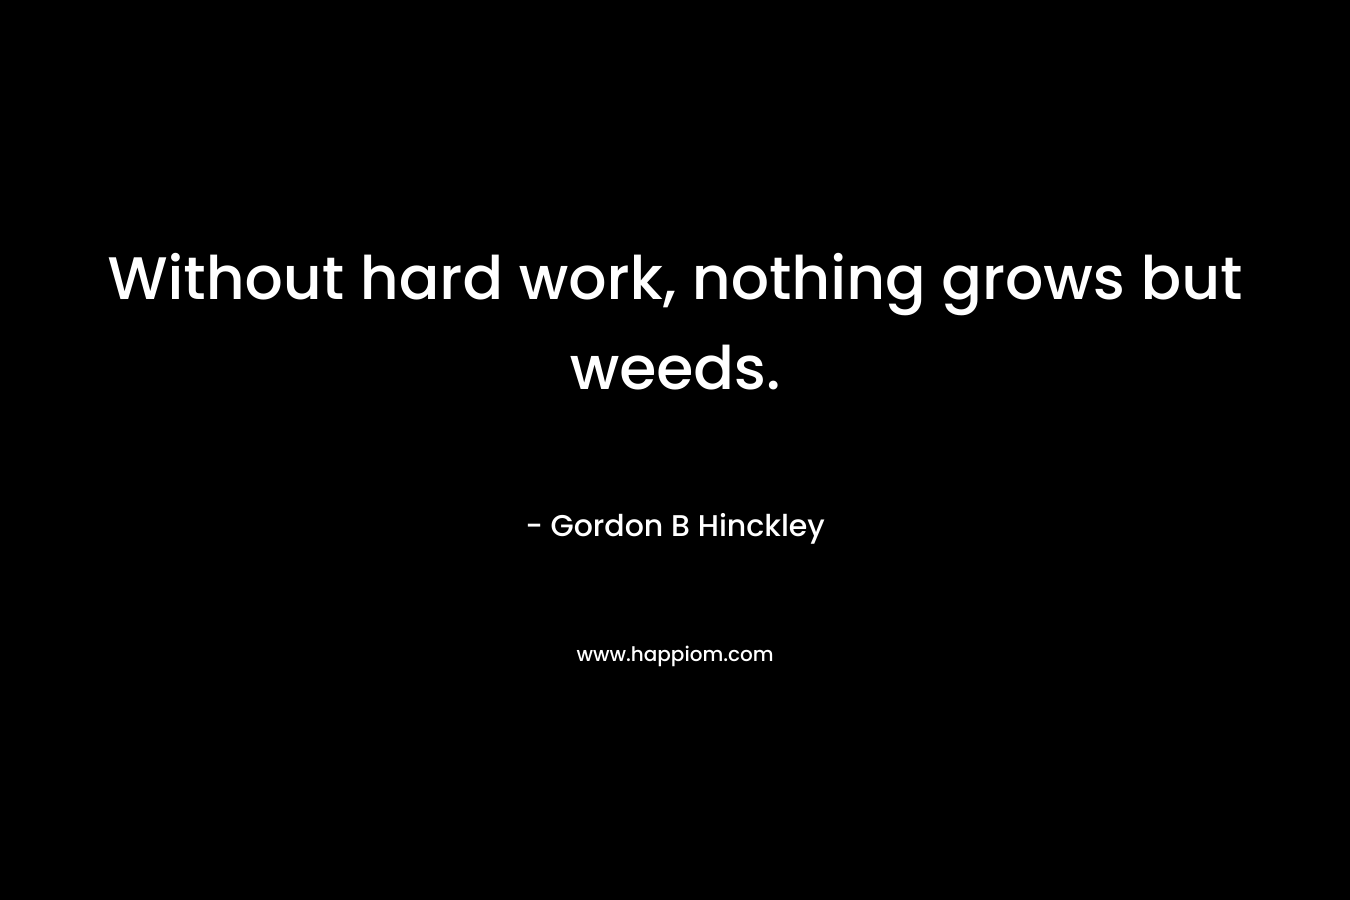 Without hard work, nothing grows but weeds. – Gordon B Hinckley